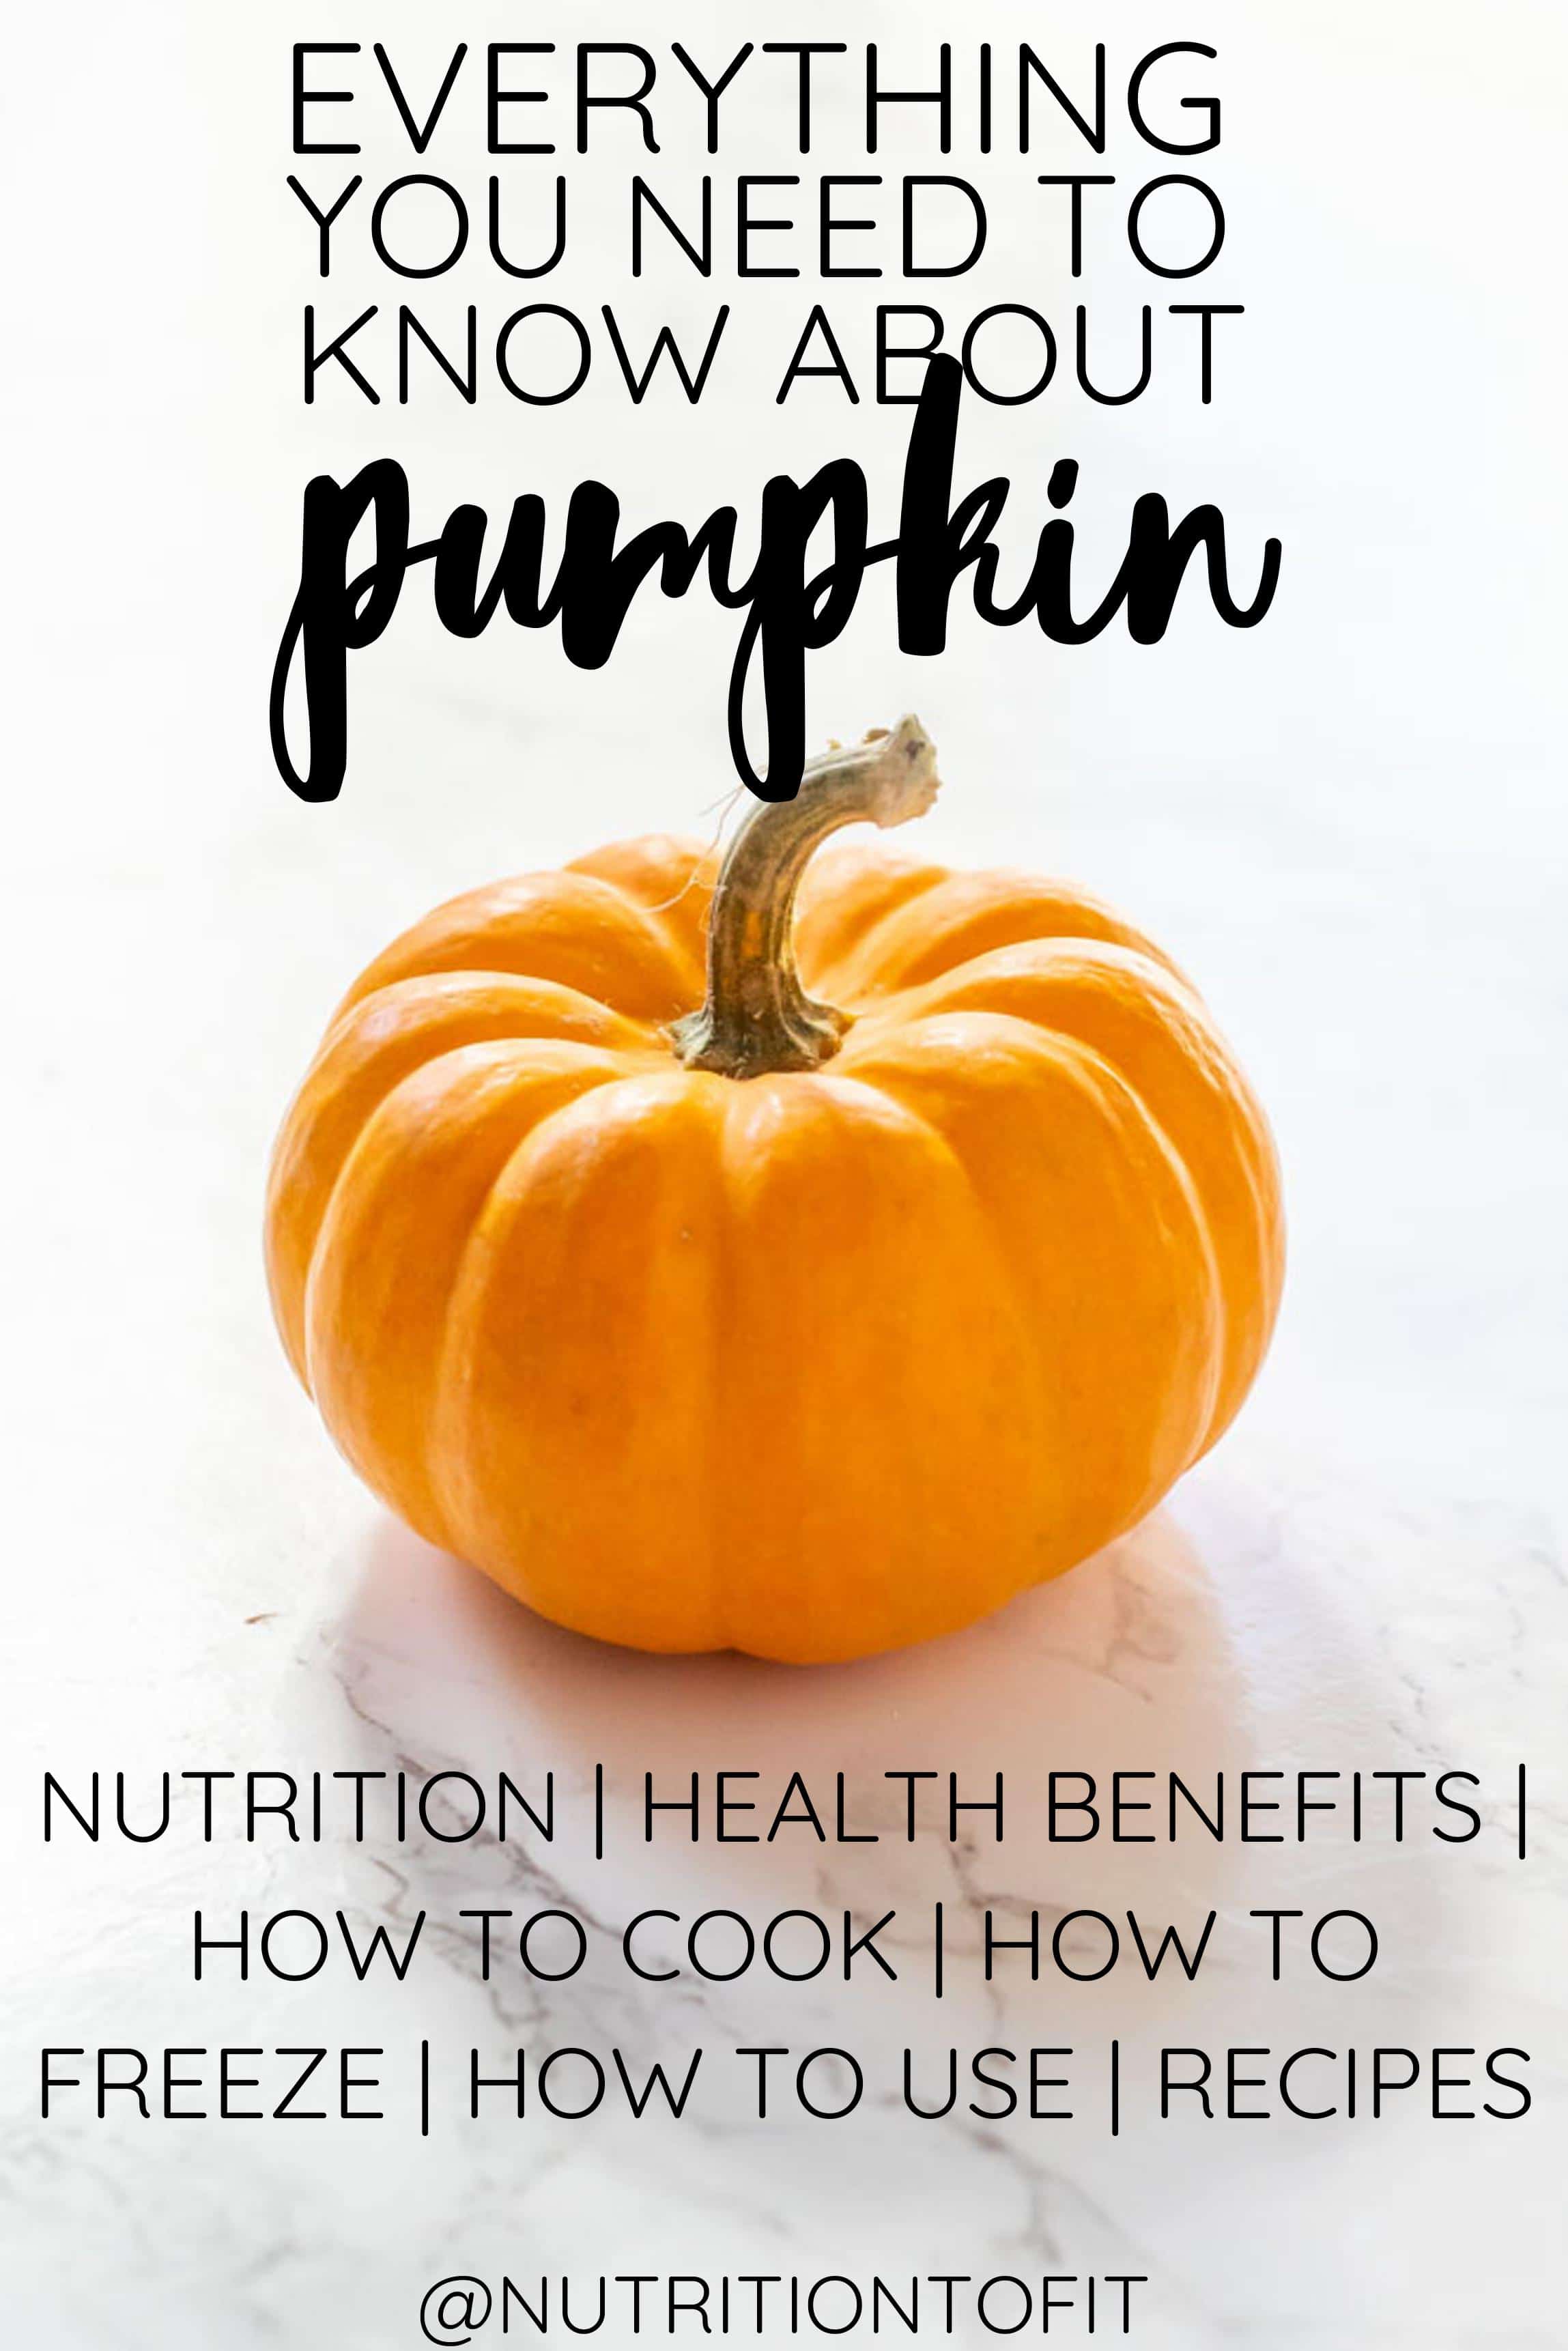 white image with a mini pumpkin with text that says "everything you need to know about pumpkin: nutrition, health benefits, how to cook, how to freezer, how to use, recipes